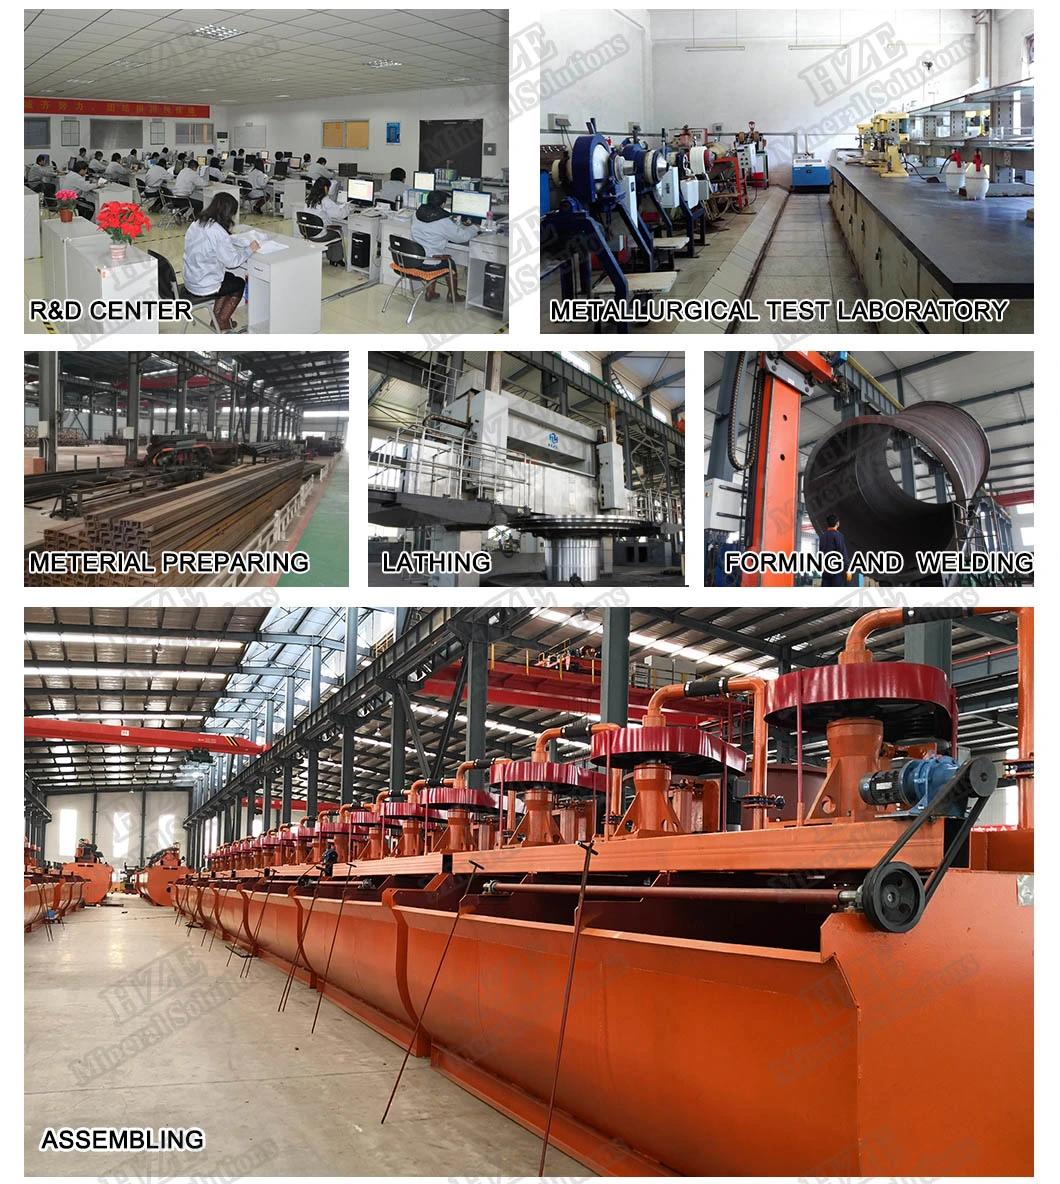 Small Scale Gold Mining Crushing Equipment Jaw Crusher of Processing Plant